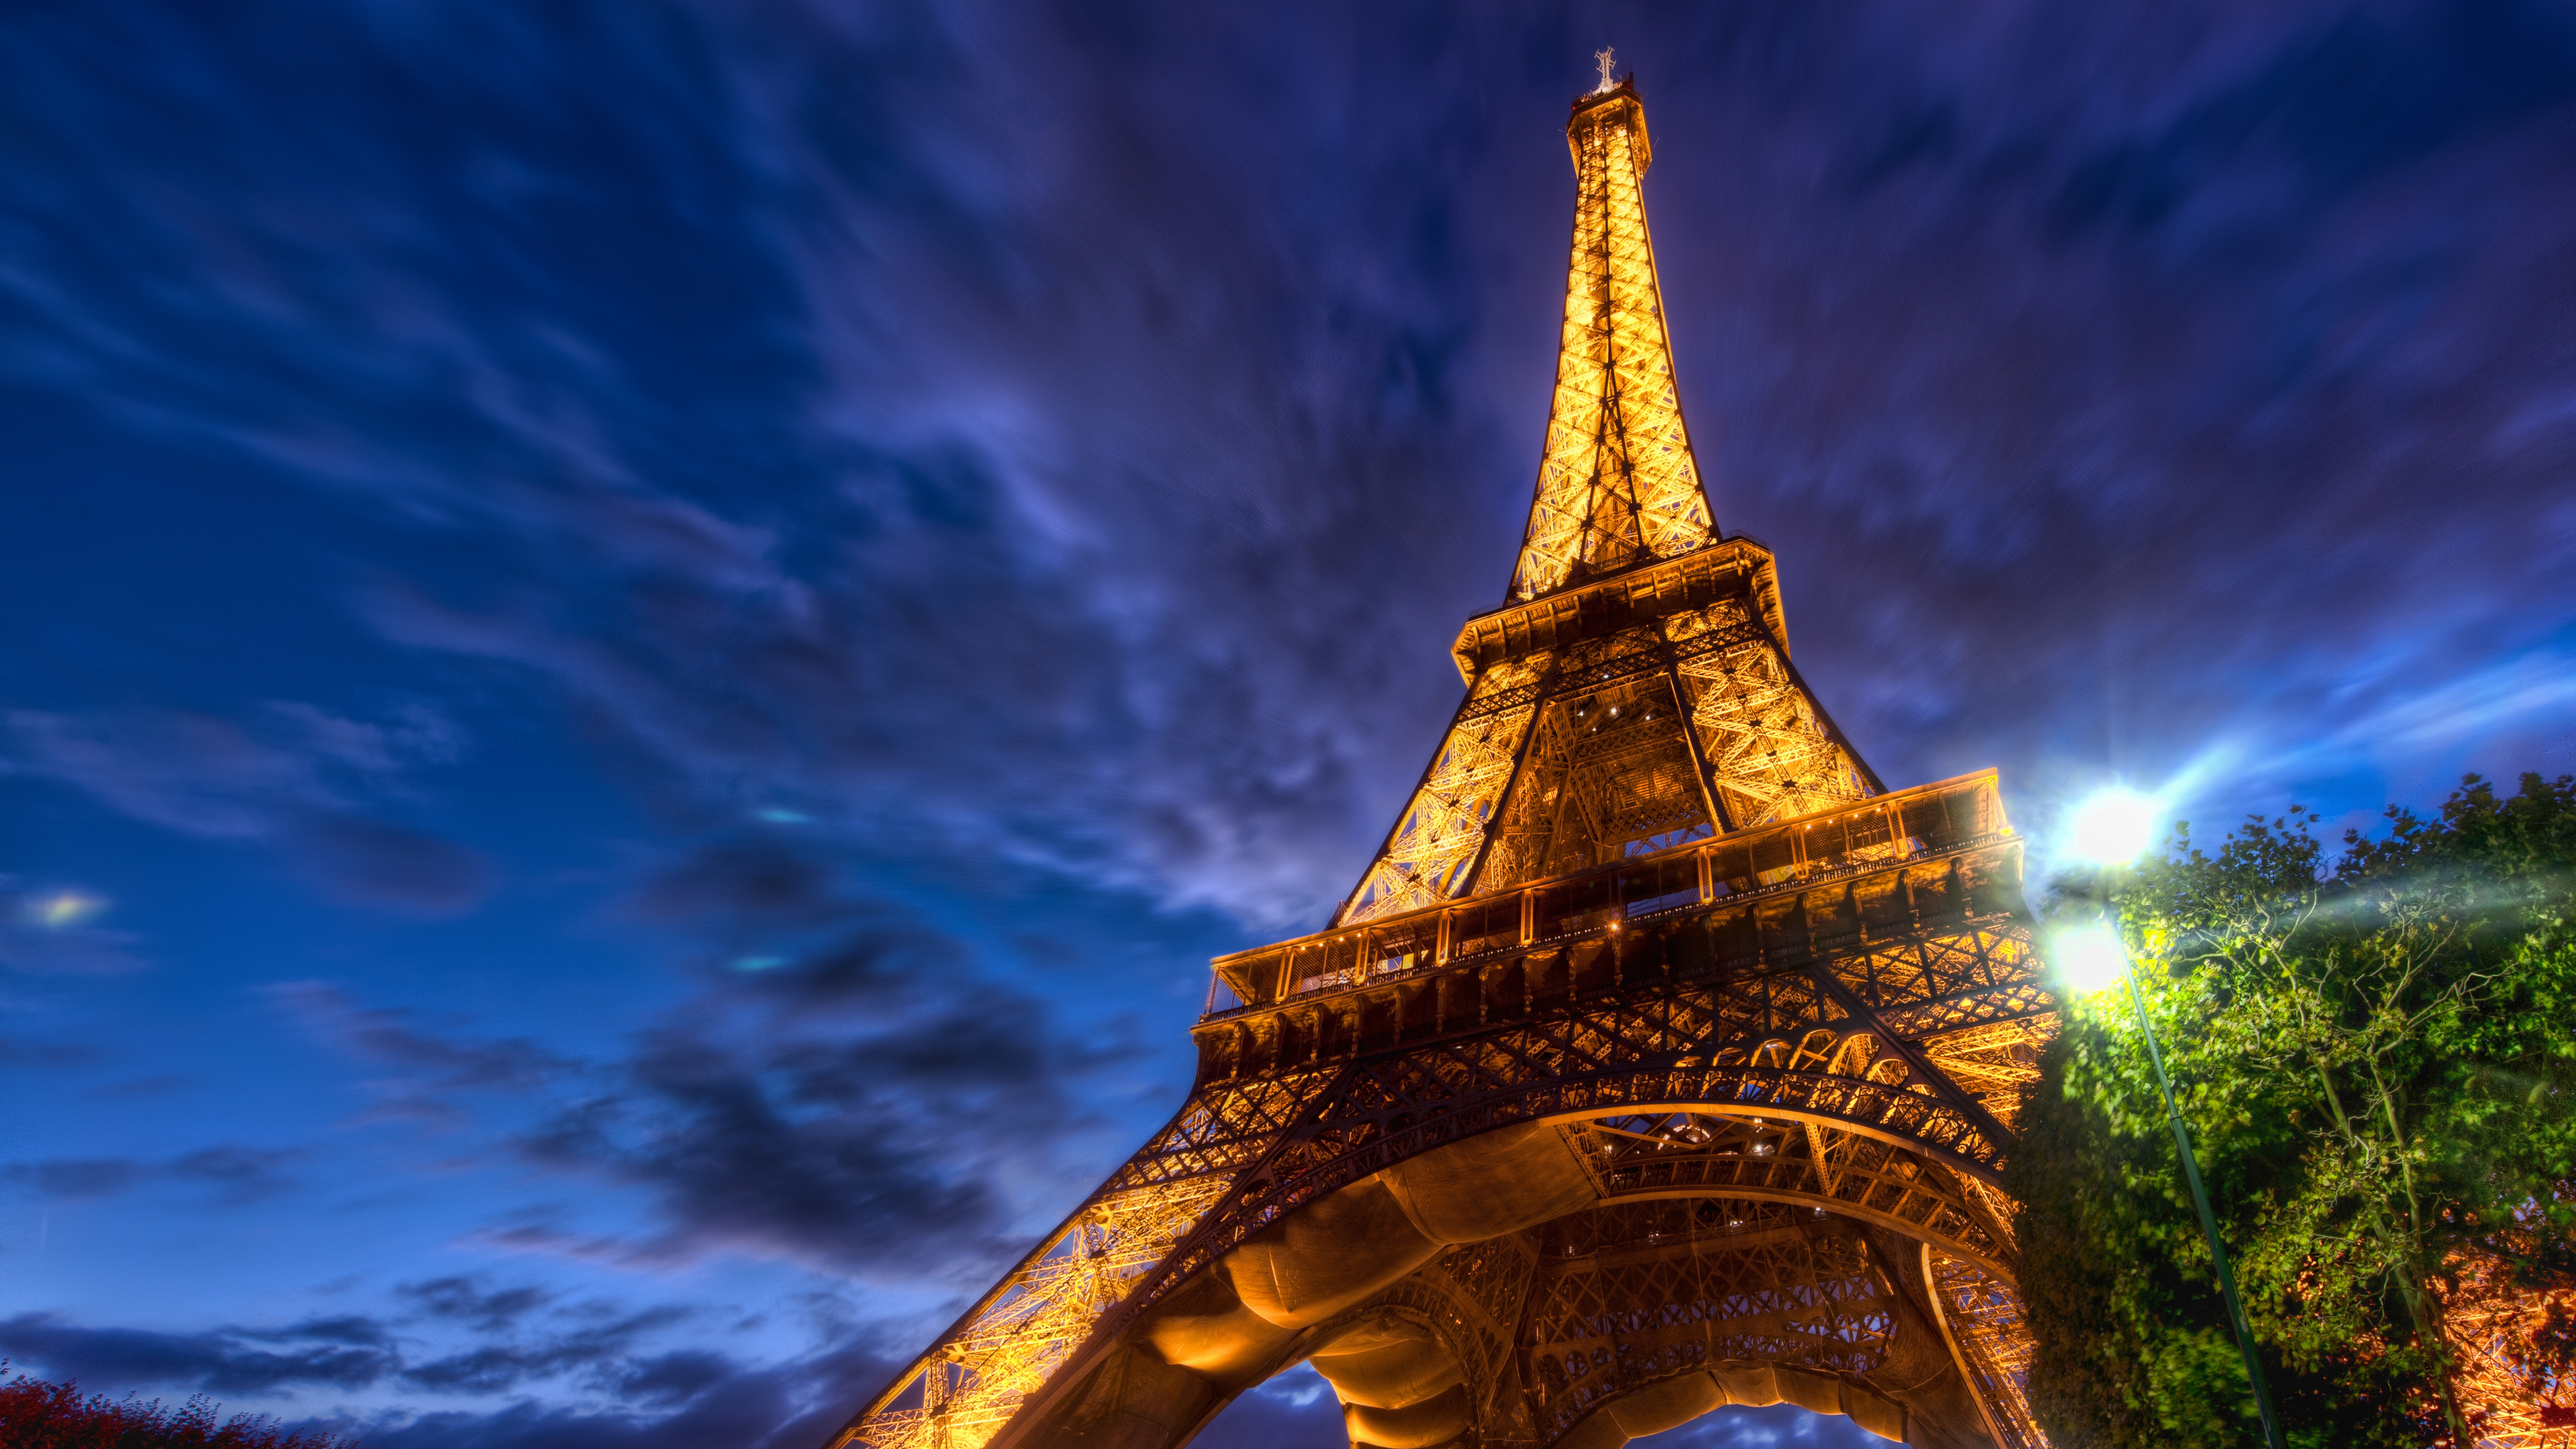 General 3840x2160 Trey Ratcliff photography cityscape France Paris Eiffel Tower night lights building sky clouds landmark Europe low-angle